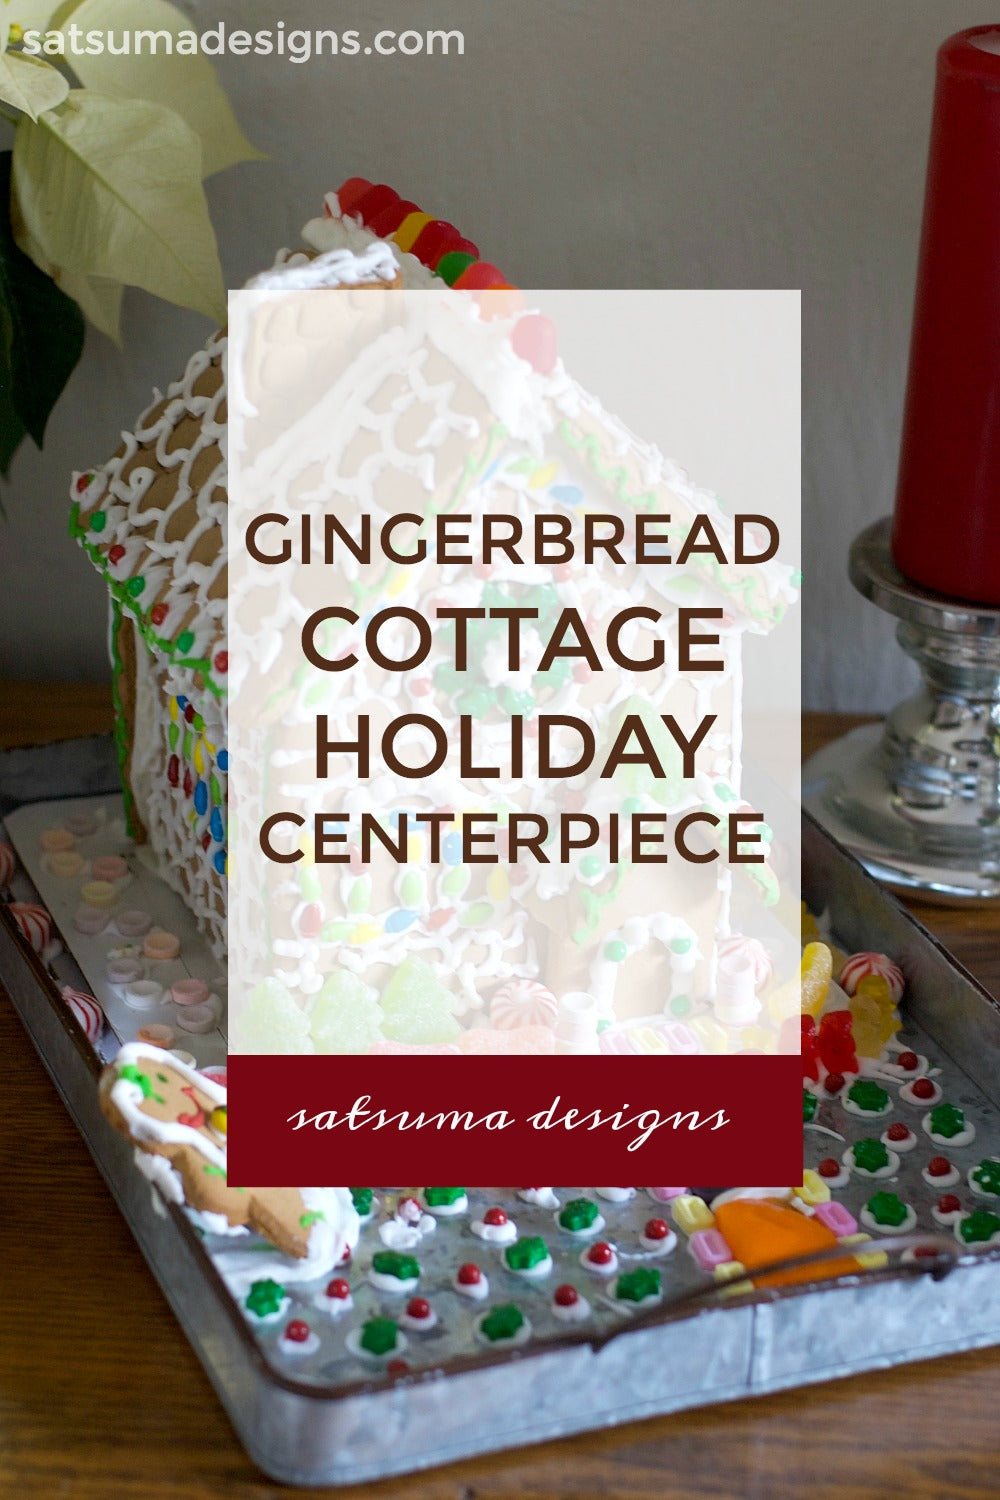 Gingerbread Cottage Holiday Centerpiece